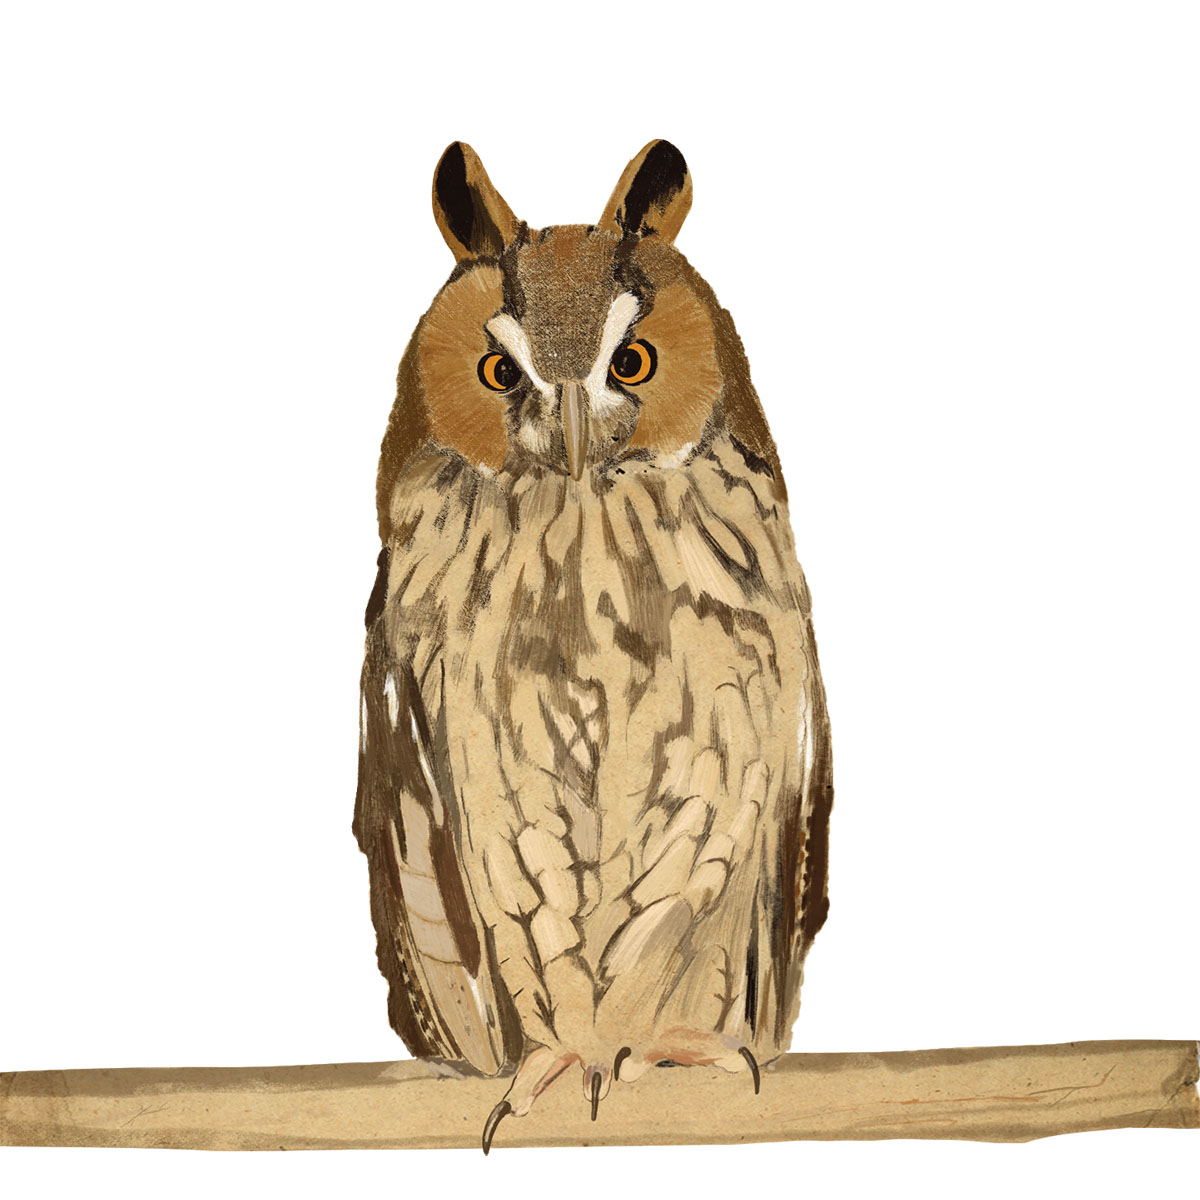 An illustration of a brown owl with lighter feathers on its belly perched on a wooden branch